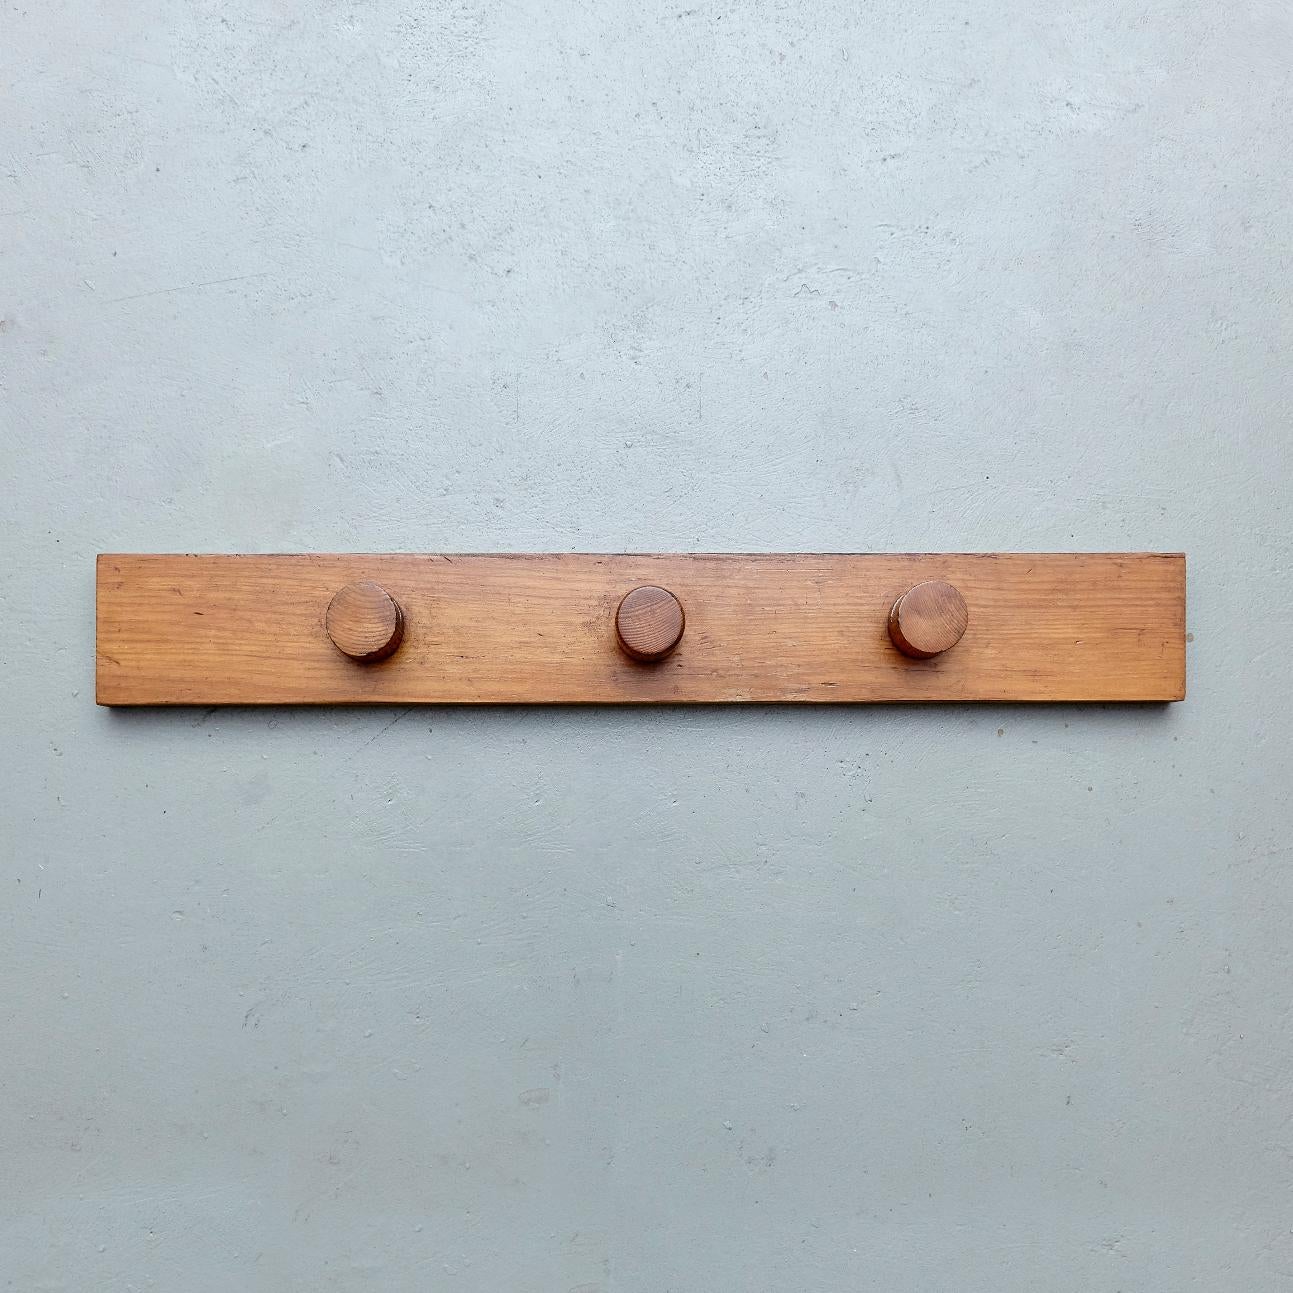 French Charlotte Perriand Mid-Century Modern Pine Wood Coat Rack for Les Arcs